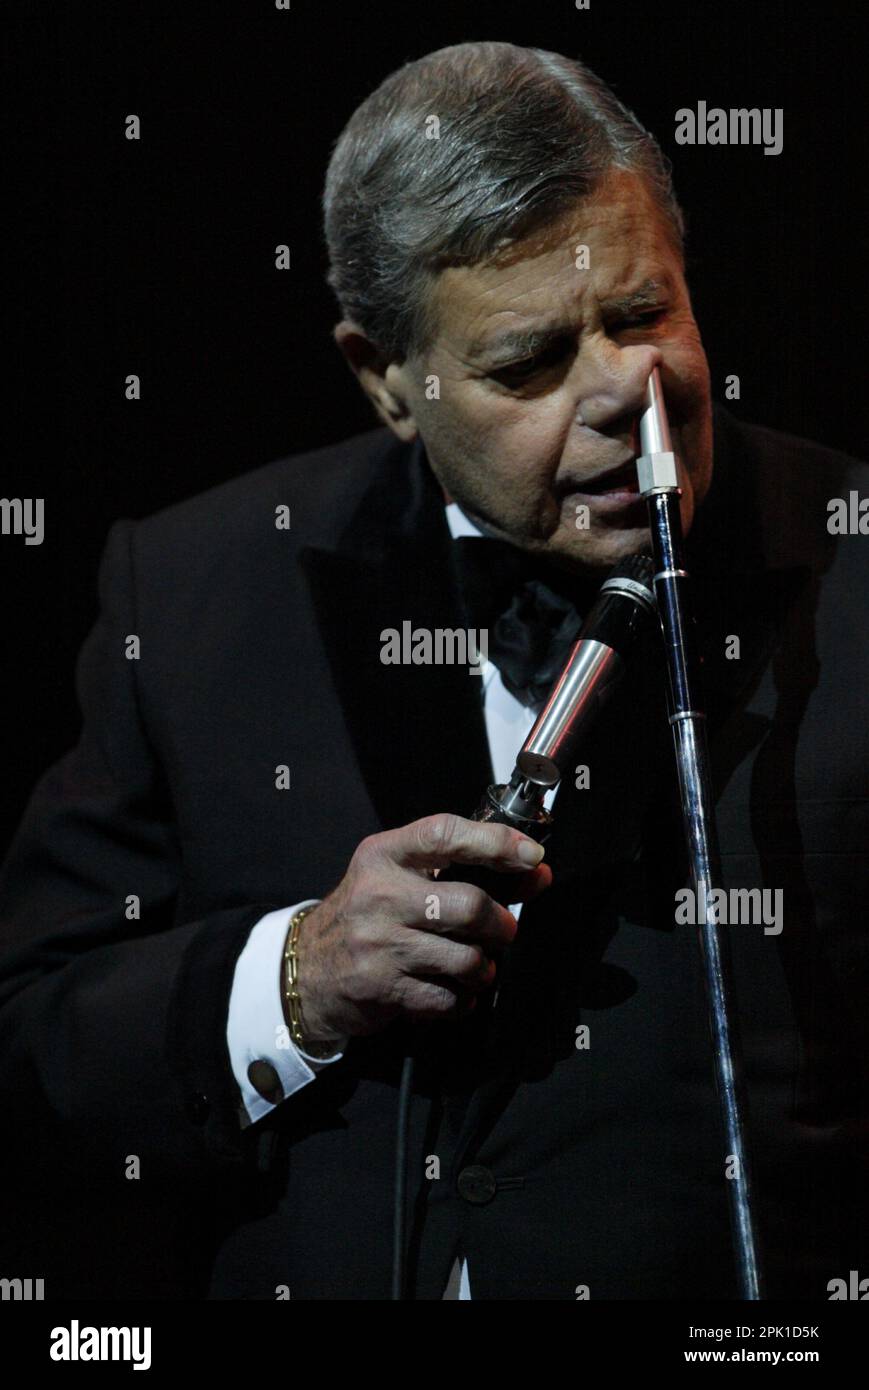 Jerry Lewis The 'Laugh For Life' comedy event raising funds for Muscular Dystrophy, held at the Enmore Theatre. Sydney, Australia - 21.09.09 Stock Photo